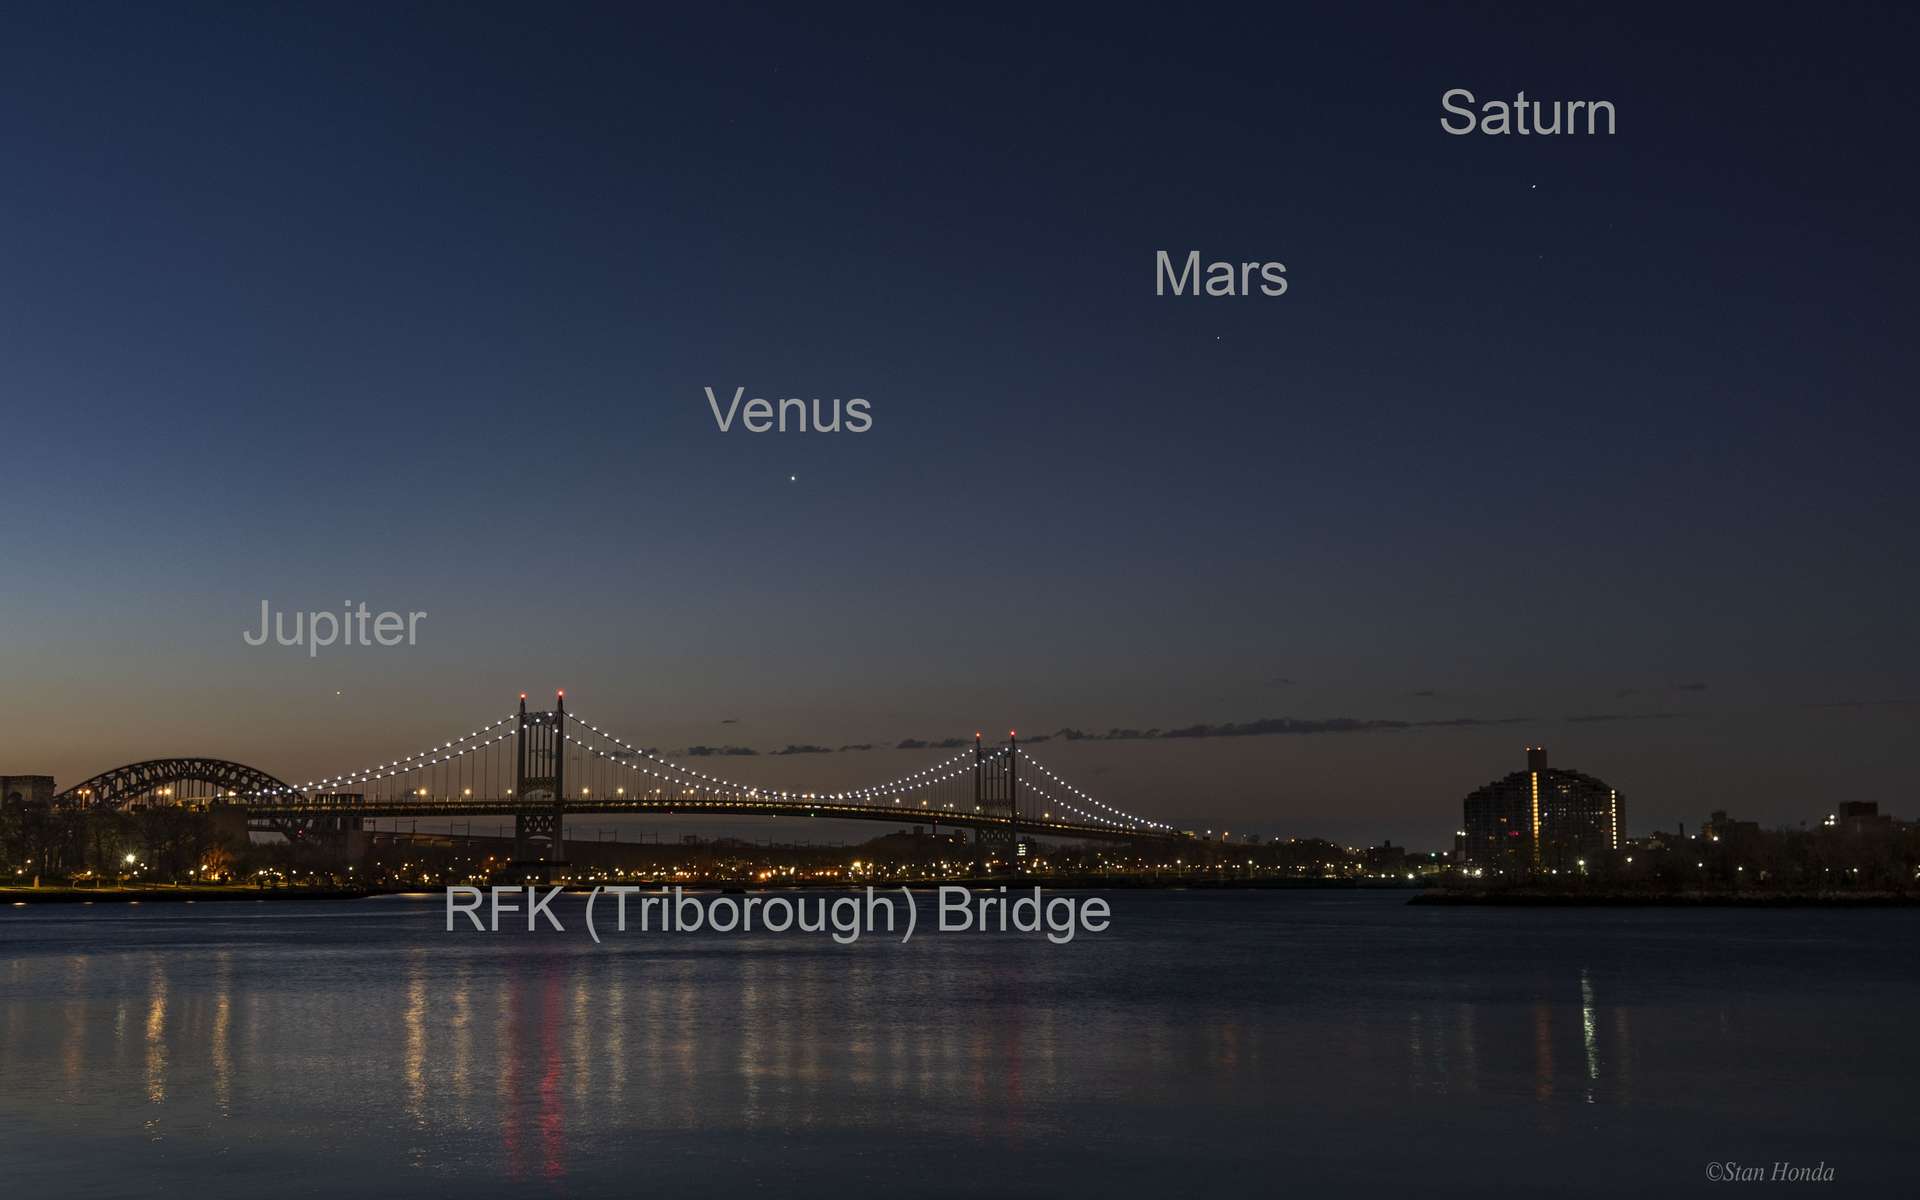 Don’t miss the chance to cross Venus and Jupiter in the sky this weekend!